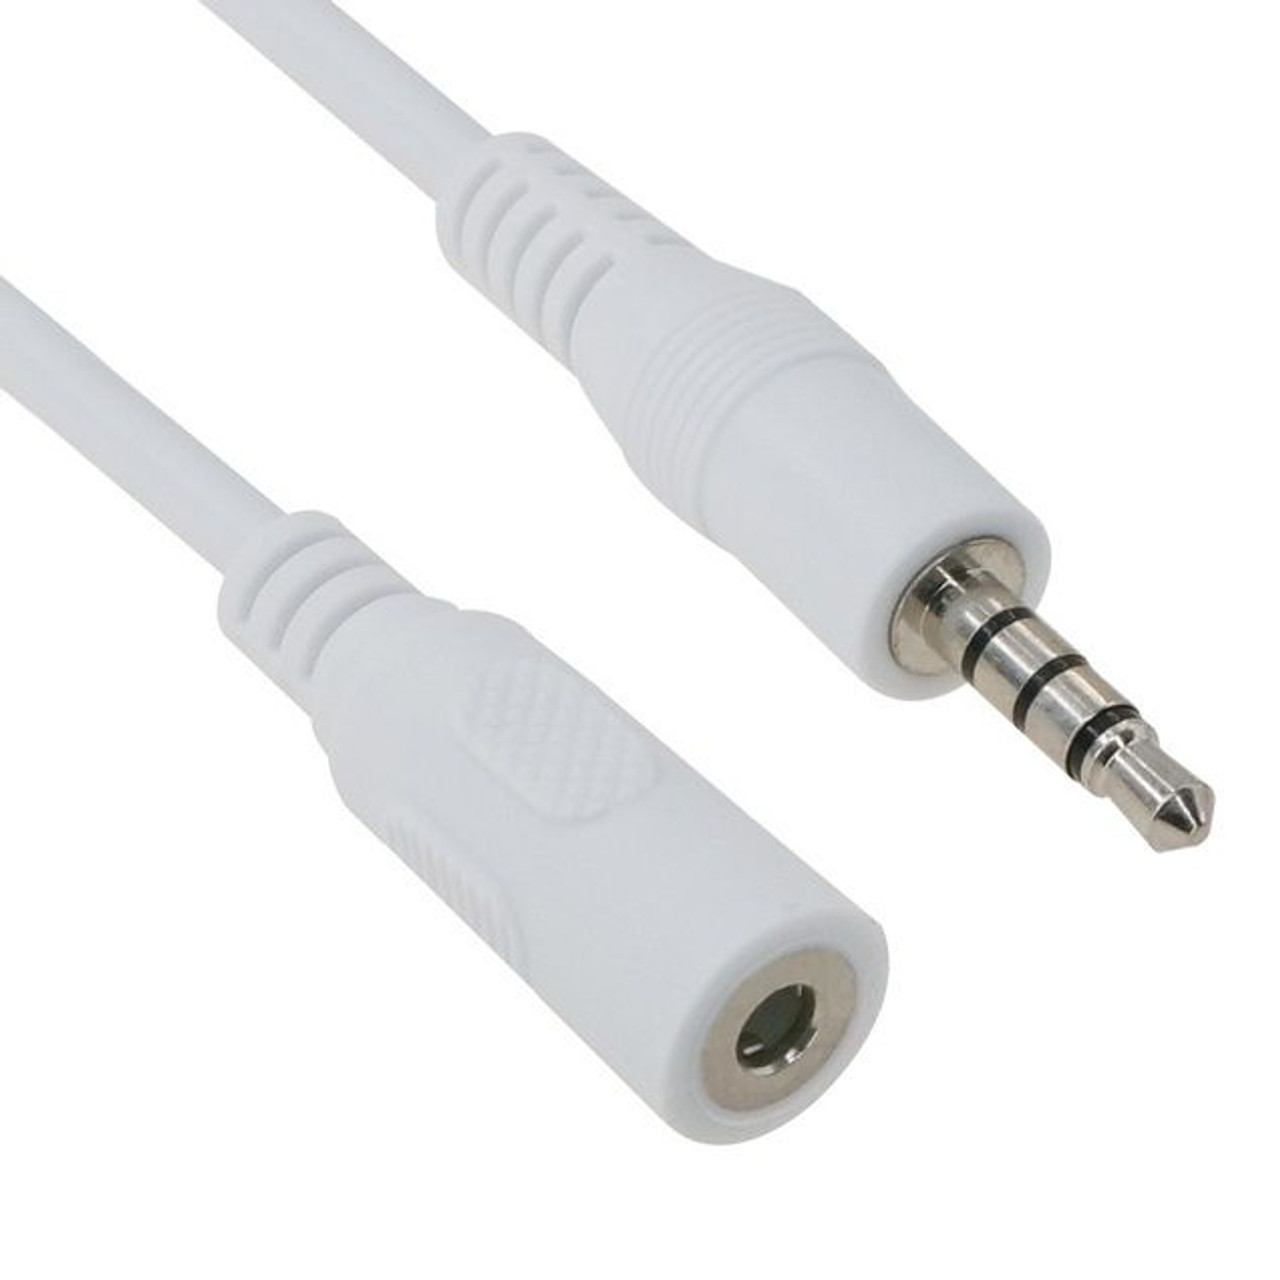 3.5mm 4-Conductor (Female Jack) to 2.5mm 4-Conductor TRRS (Male Plug)  Adapter